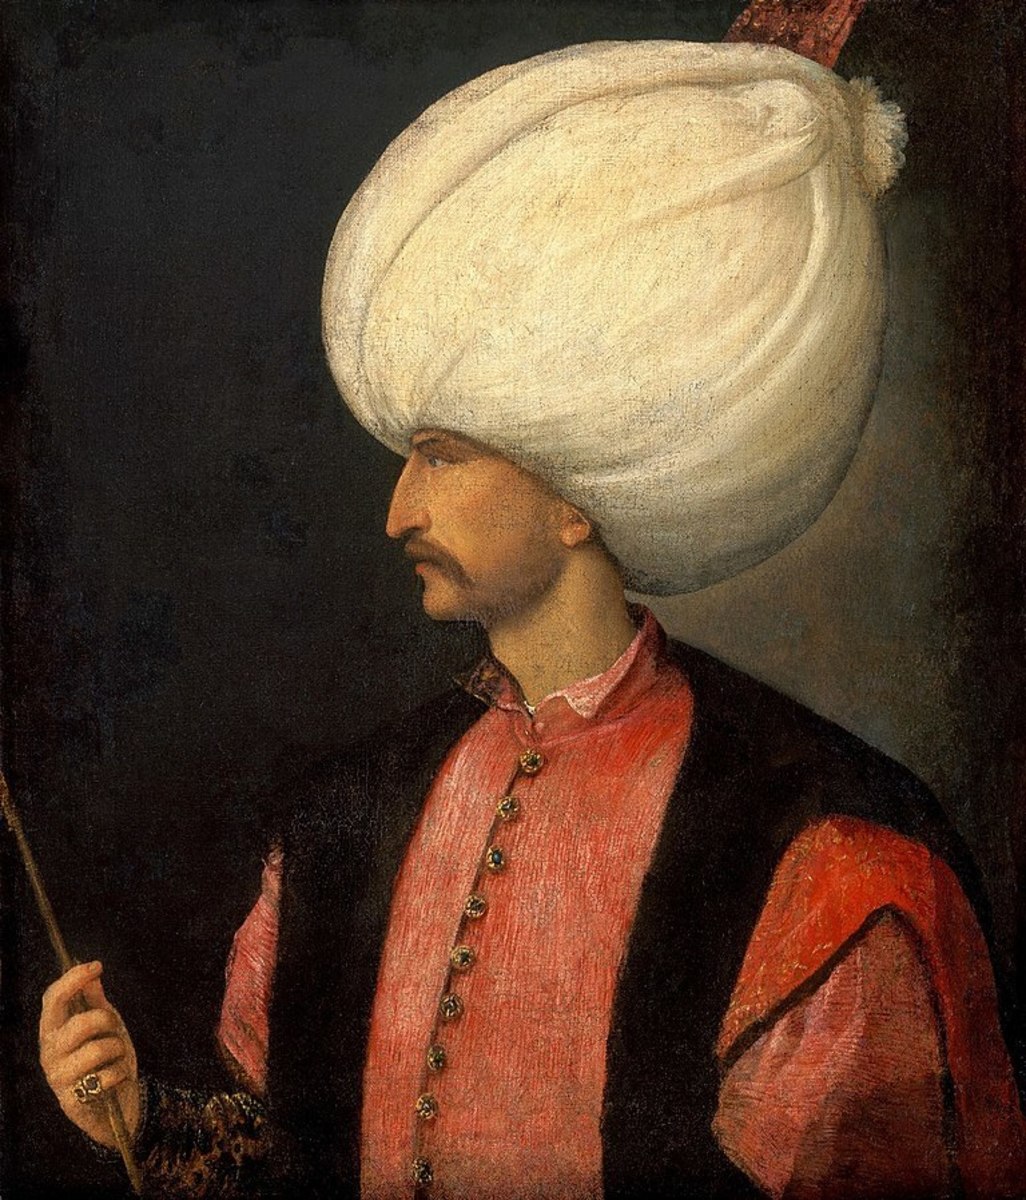 The Life of Suleiman the Magnificent